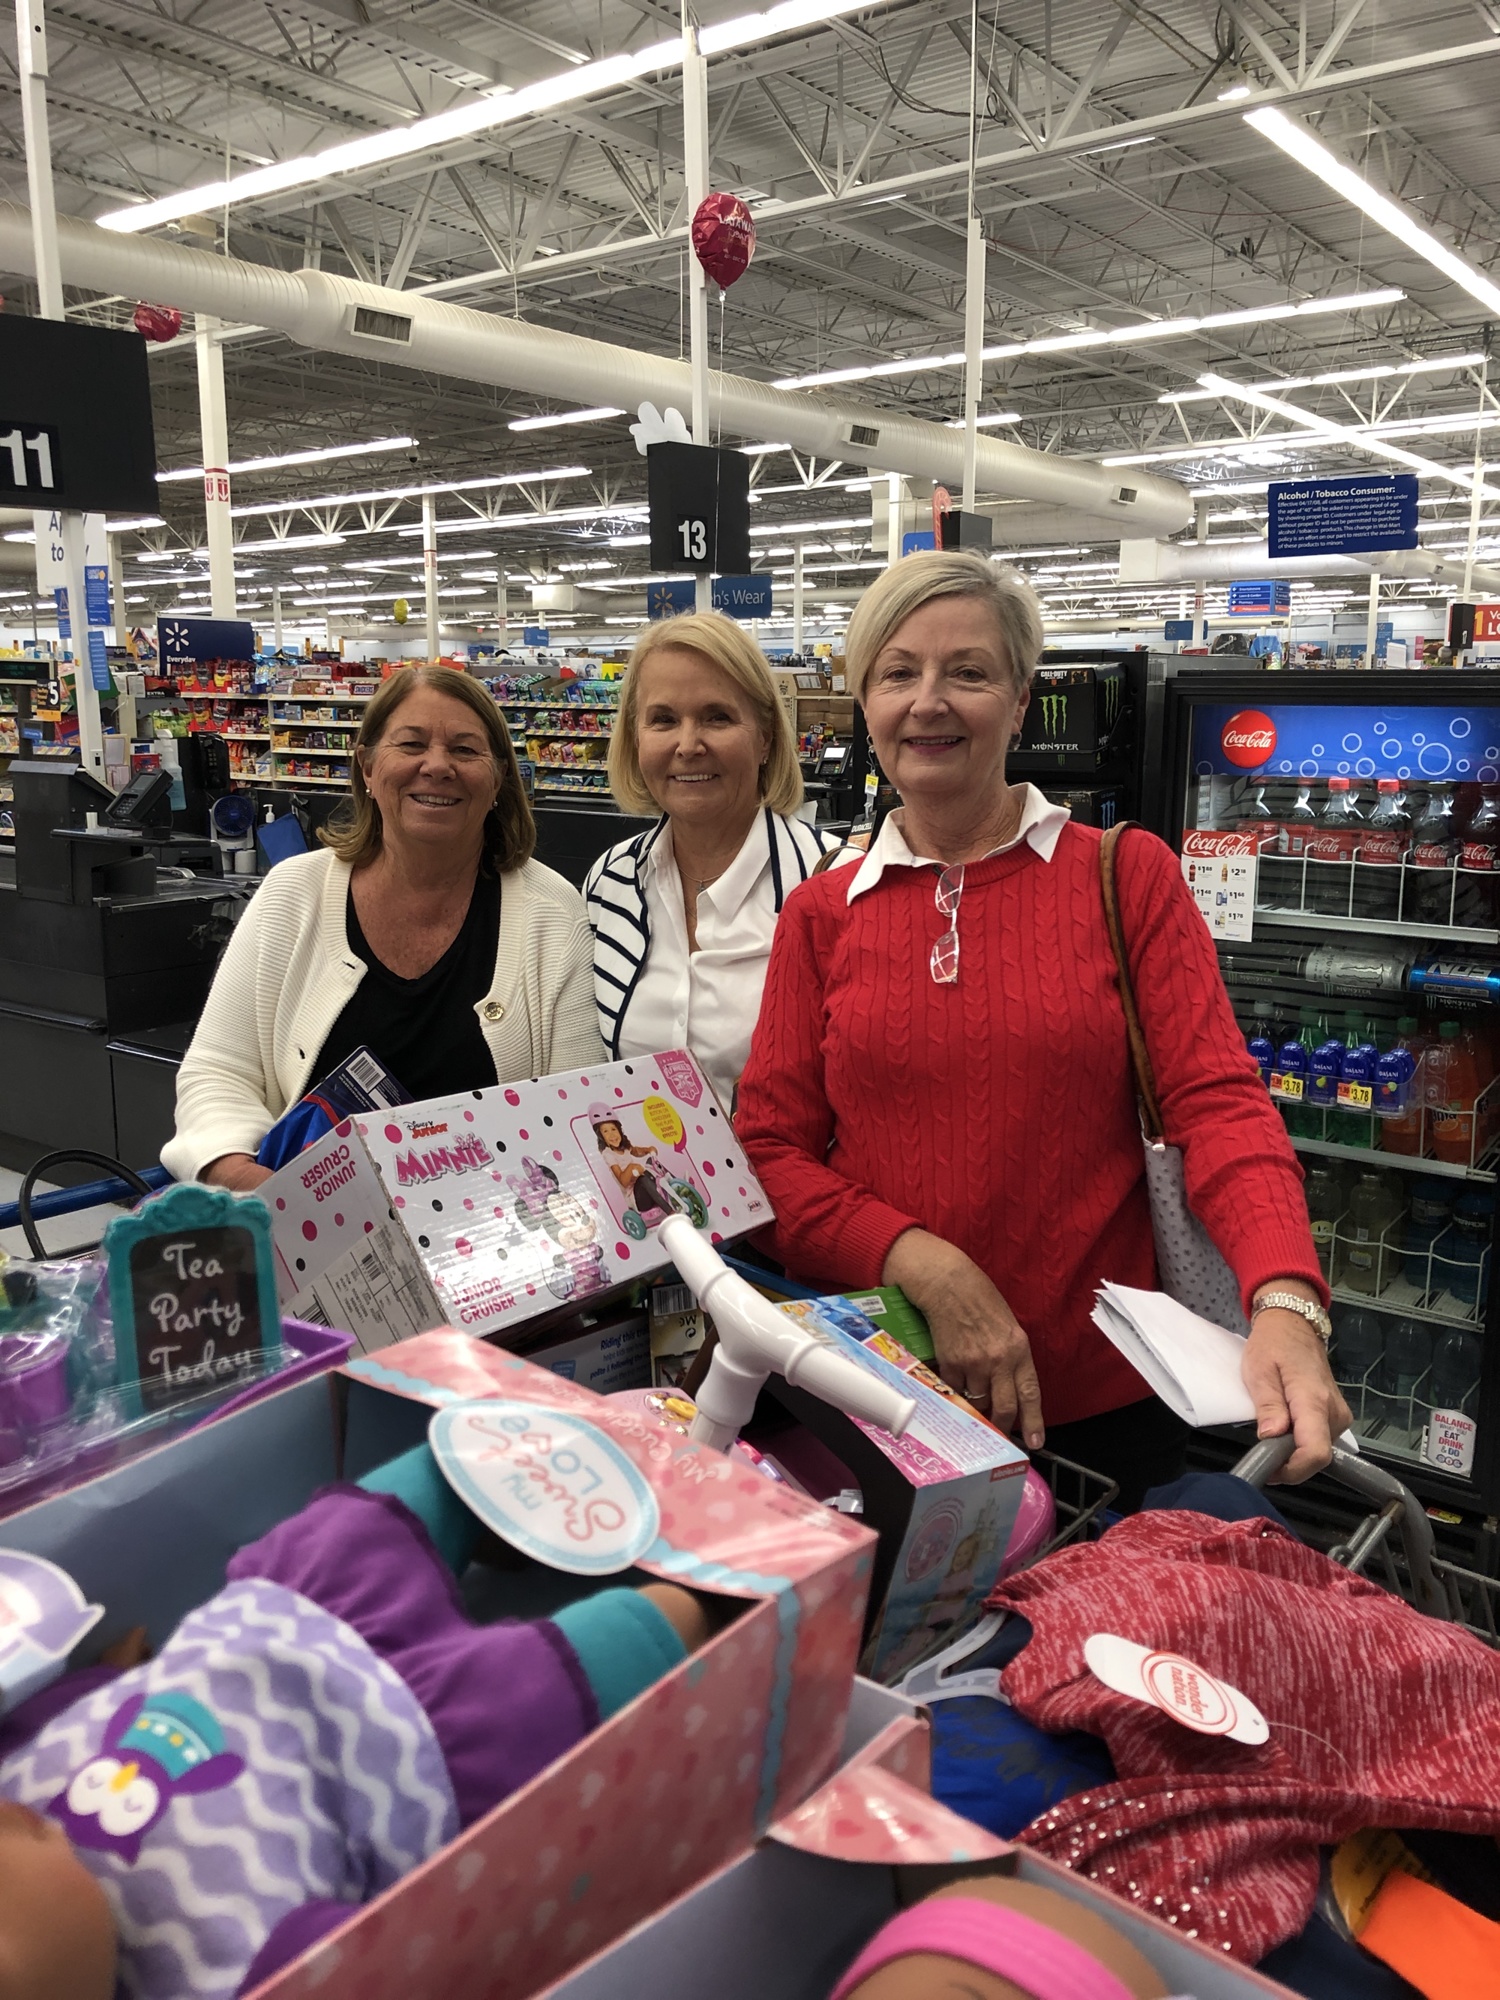 The Longboat Key Garden Club collected $2,400 that went to Children First. Cathy Bishop, Marlene McBrier and Janice Cook shopped for the gifts that were donated. 